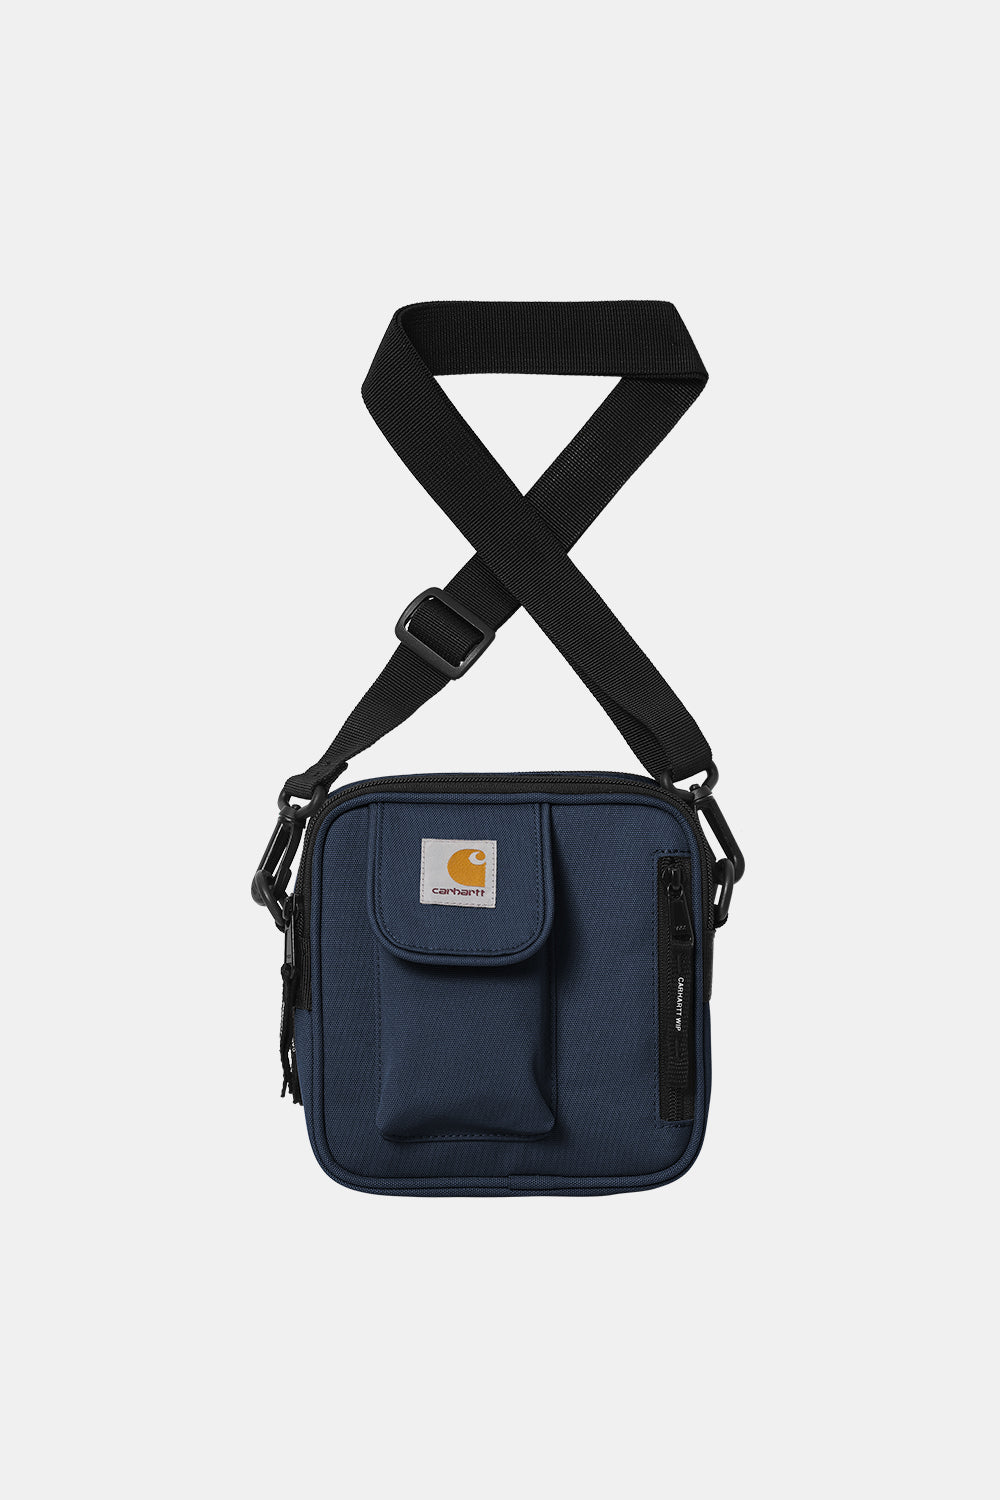 Carhartt WIP Small Essentials Recycled Side Bag (Blue)